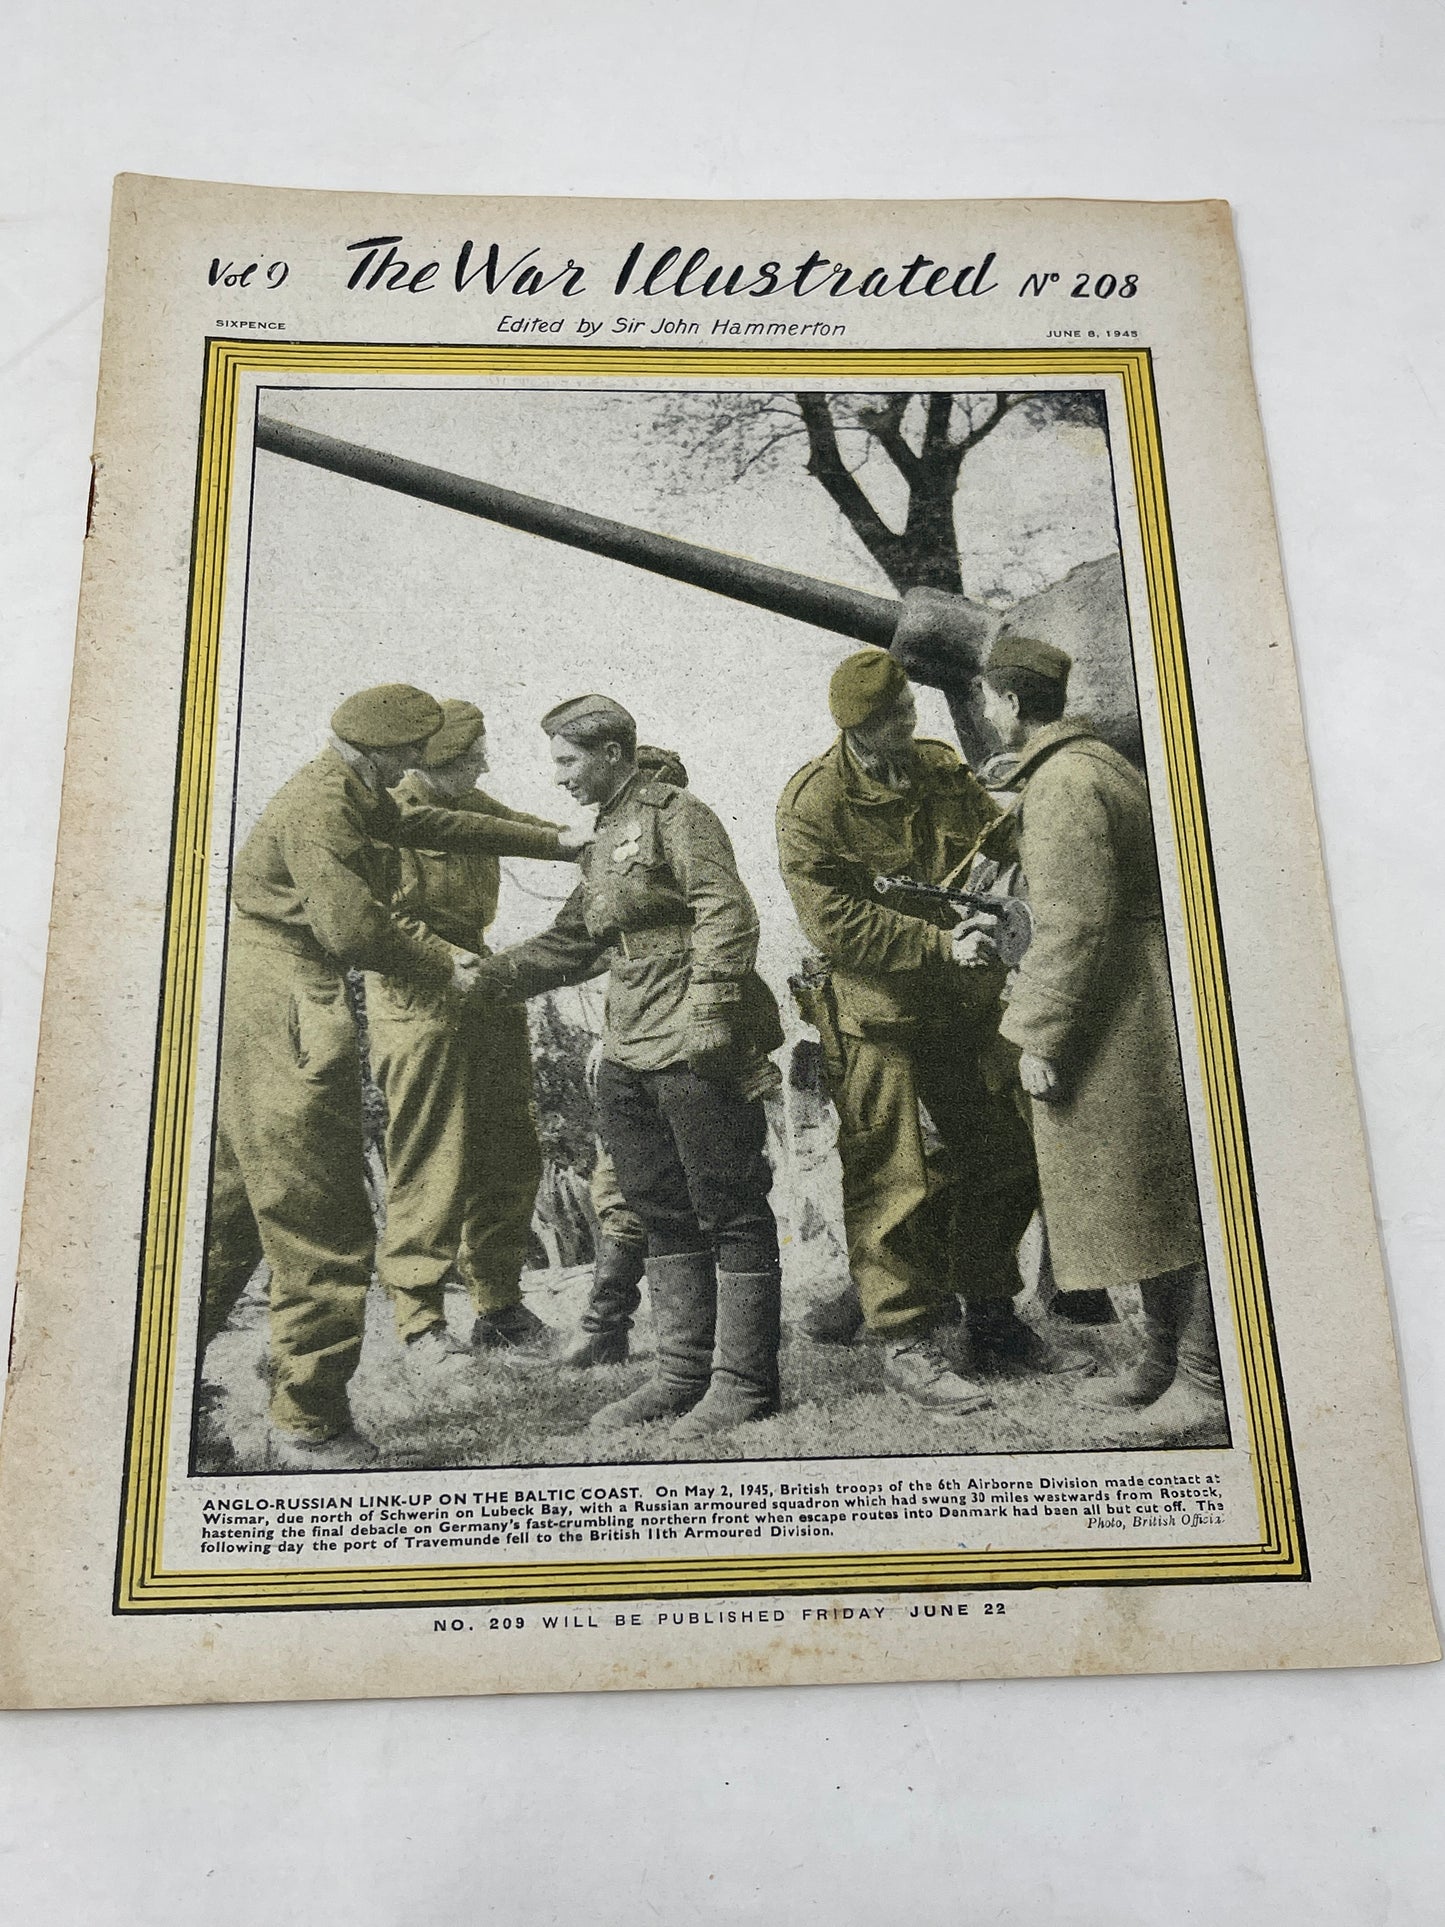 The War illustrated